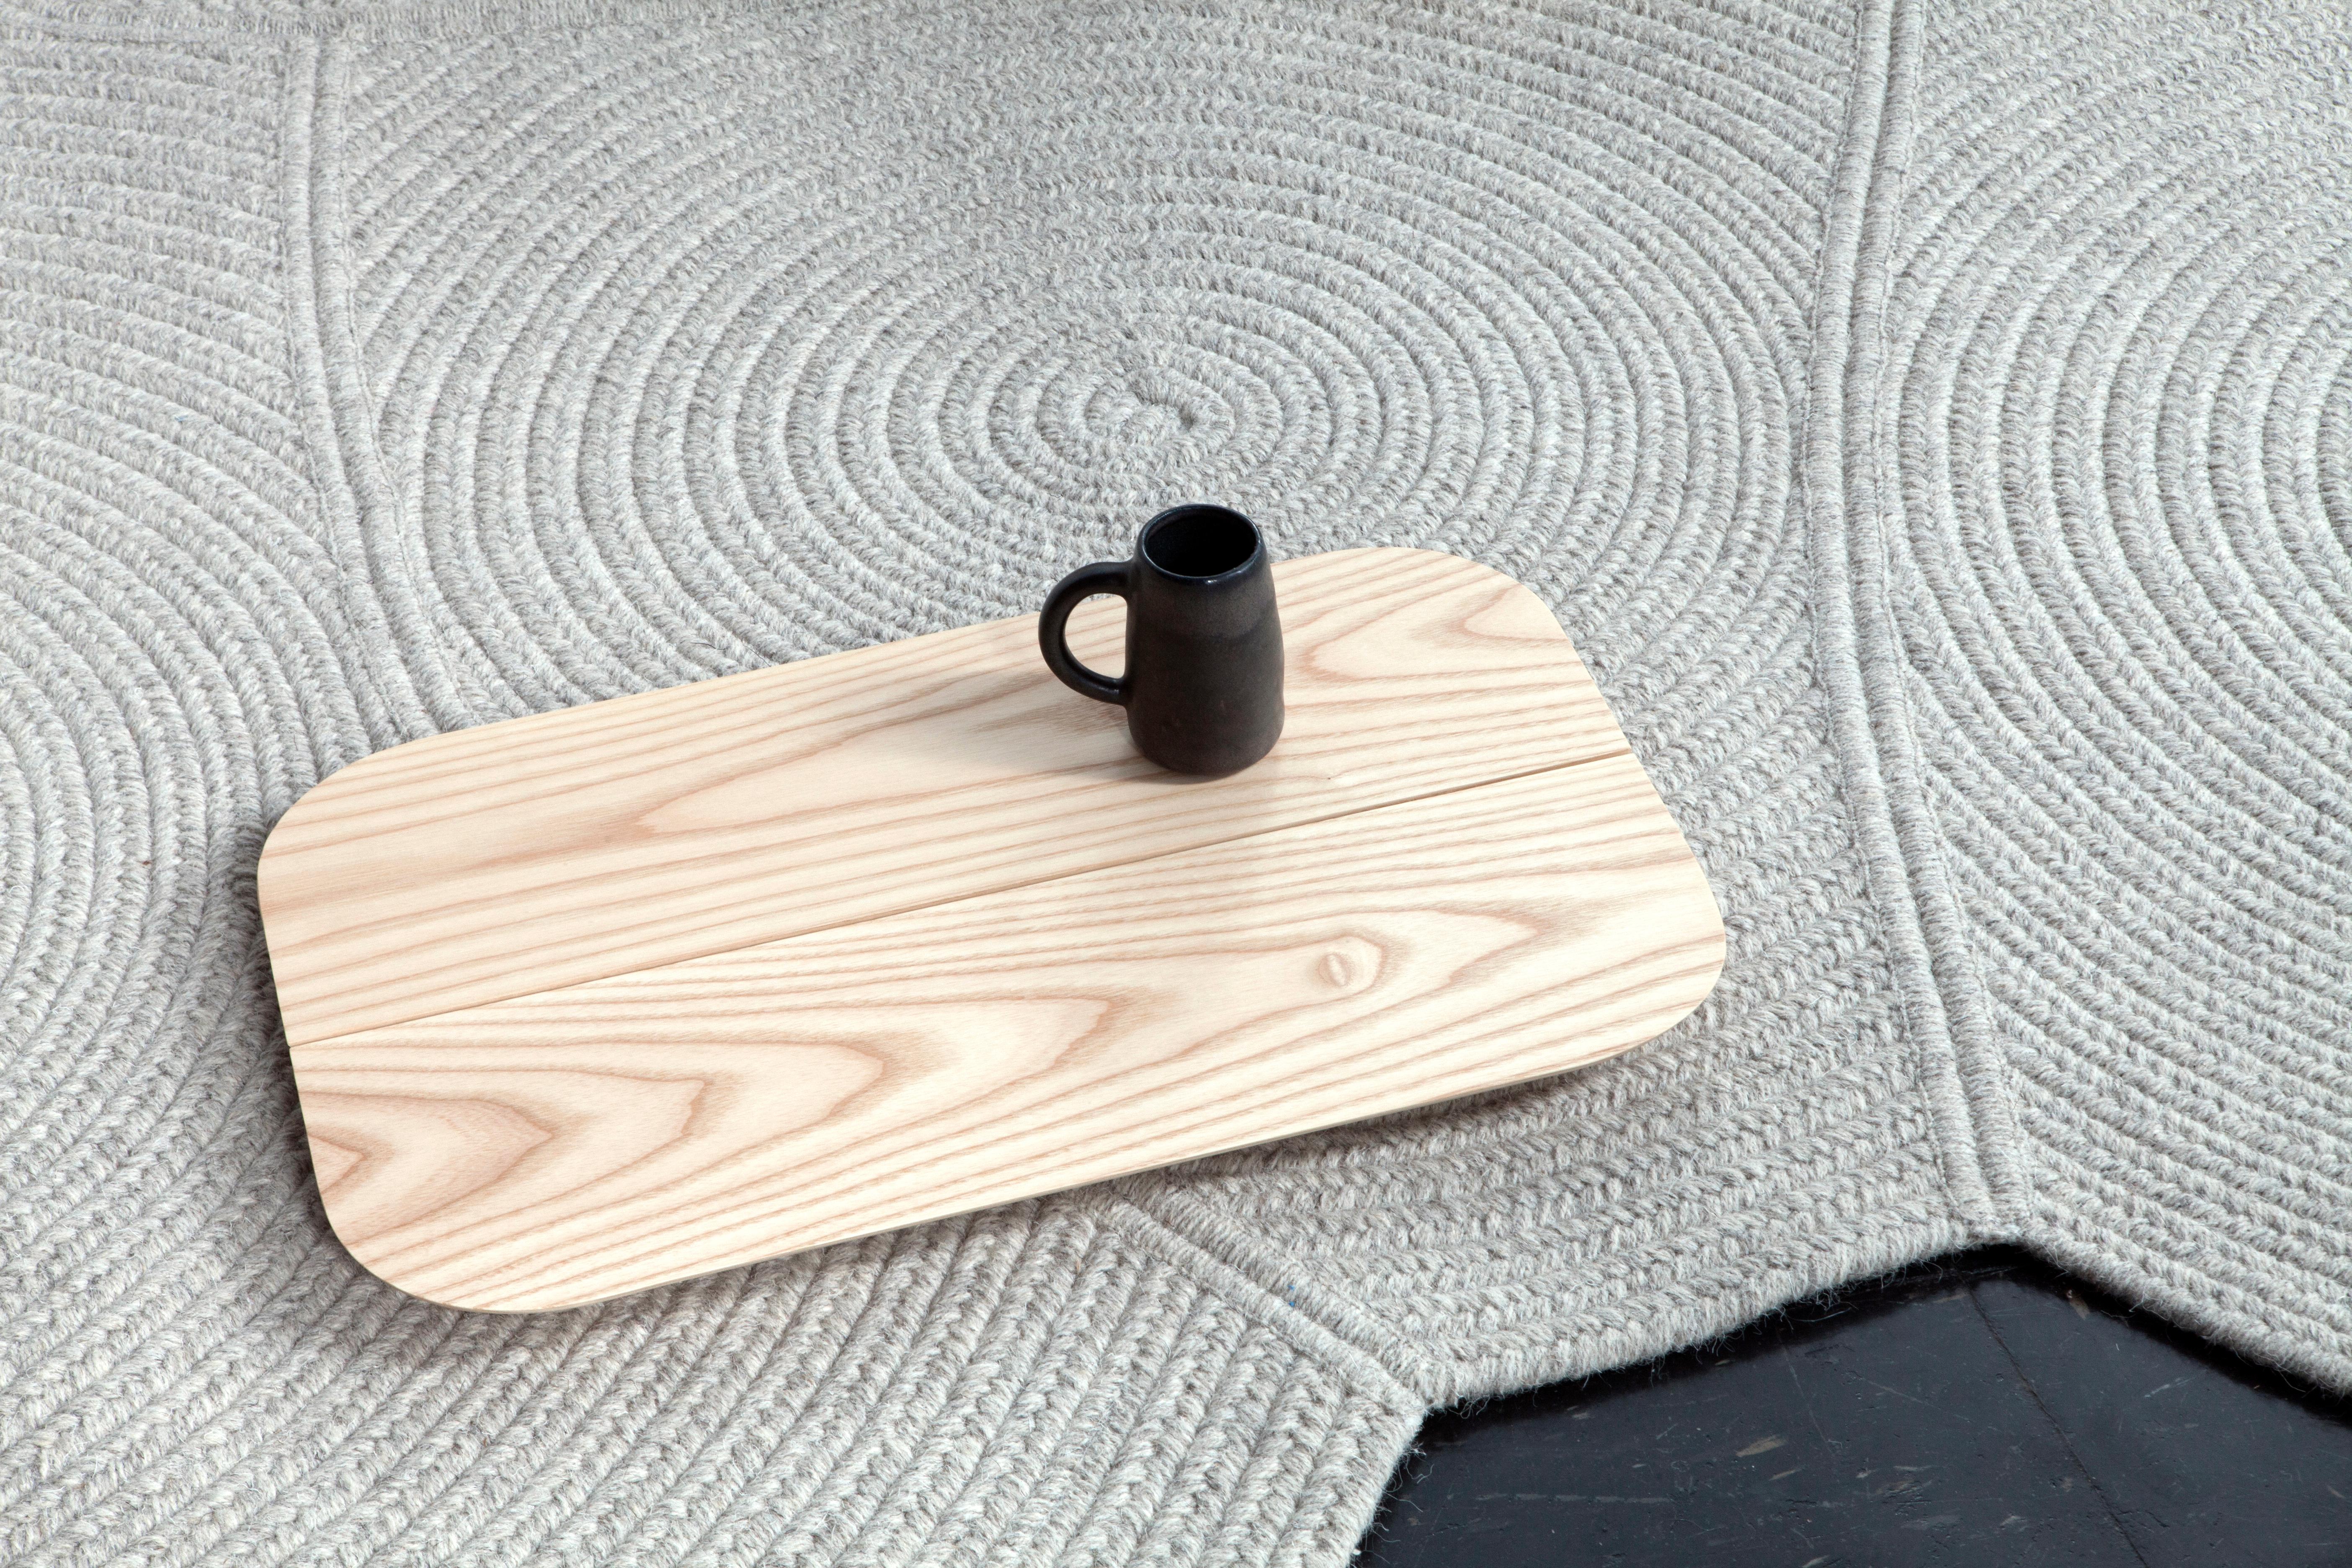 A beautifully simple and sturdy tray made in our studio from sustainably sourced ash. Use to serve food and drinks or as a low pedestal to display objects.

Dimensions:
Height: 1.25 in / 3 cm 
Width: 20 in / 51 cm
Depth: 12 in / 30.5